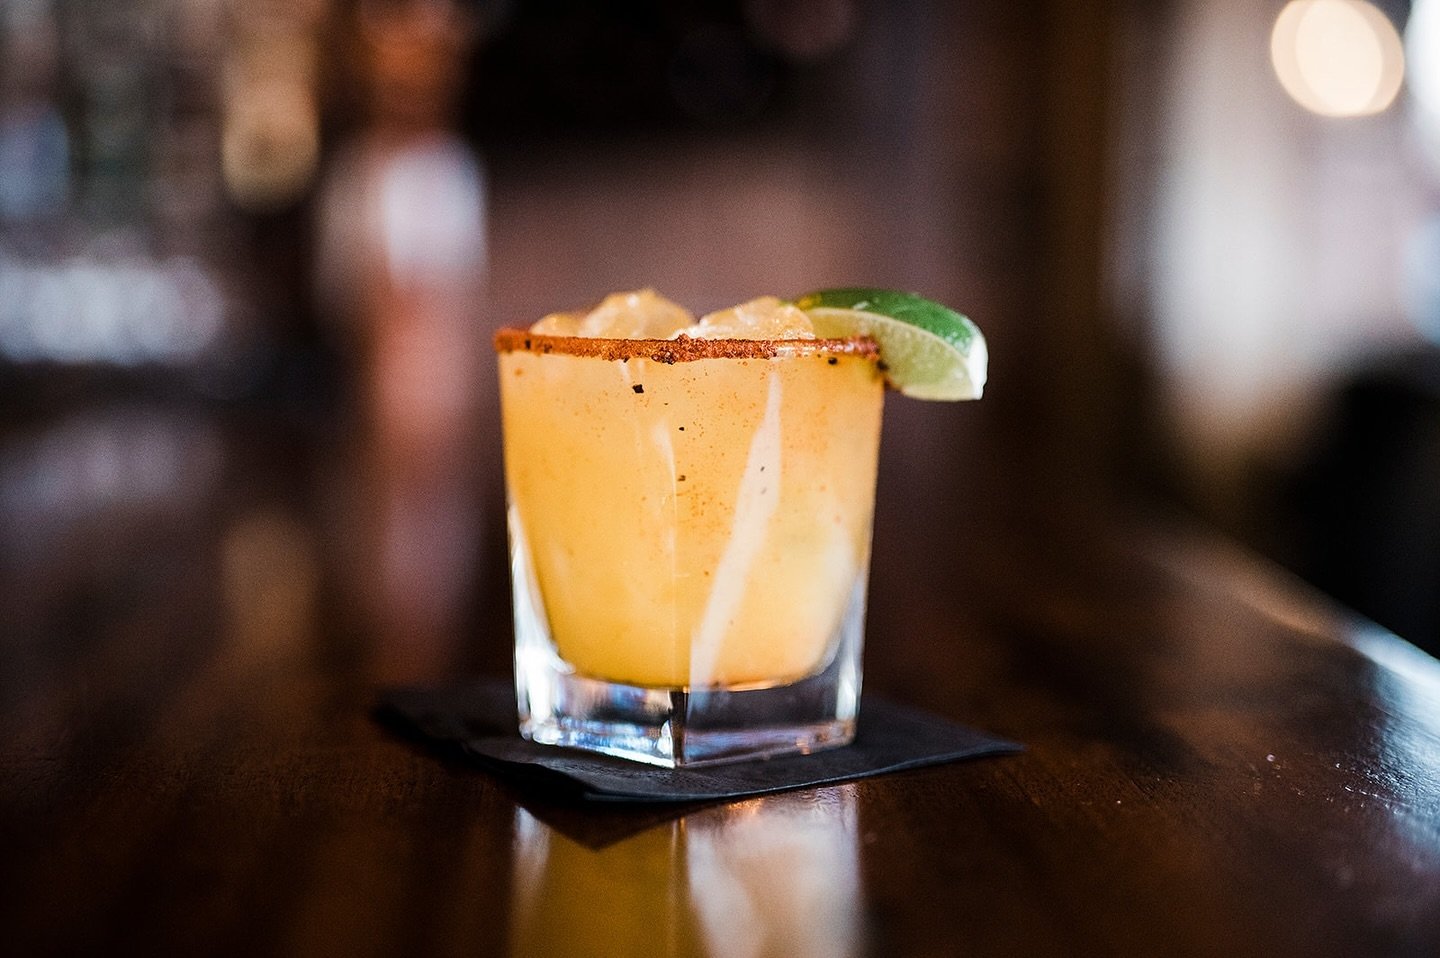 Start Celebrating the 5th of May.. TONIGHT! 

📸: Mango Jalape&ntilde;o Margarita 🥭 

Doors open at 5:00, happy hour specials at the Bar until 6:00! 

Cheers 🍻

#oldfieldsofgreenlawn #cincodemayo